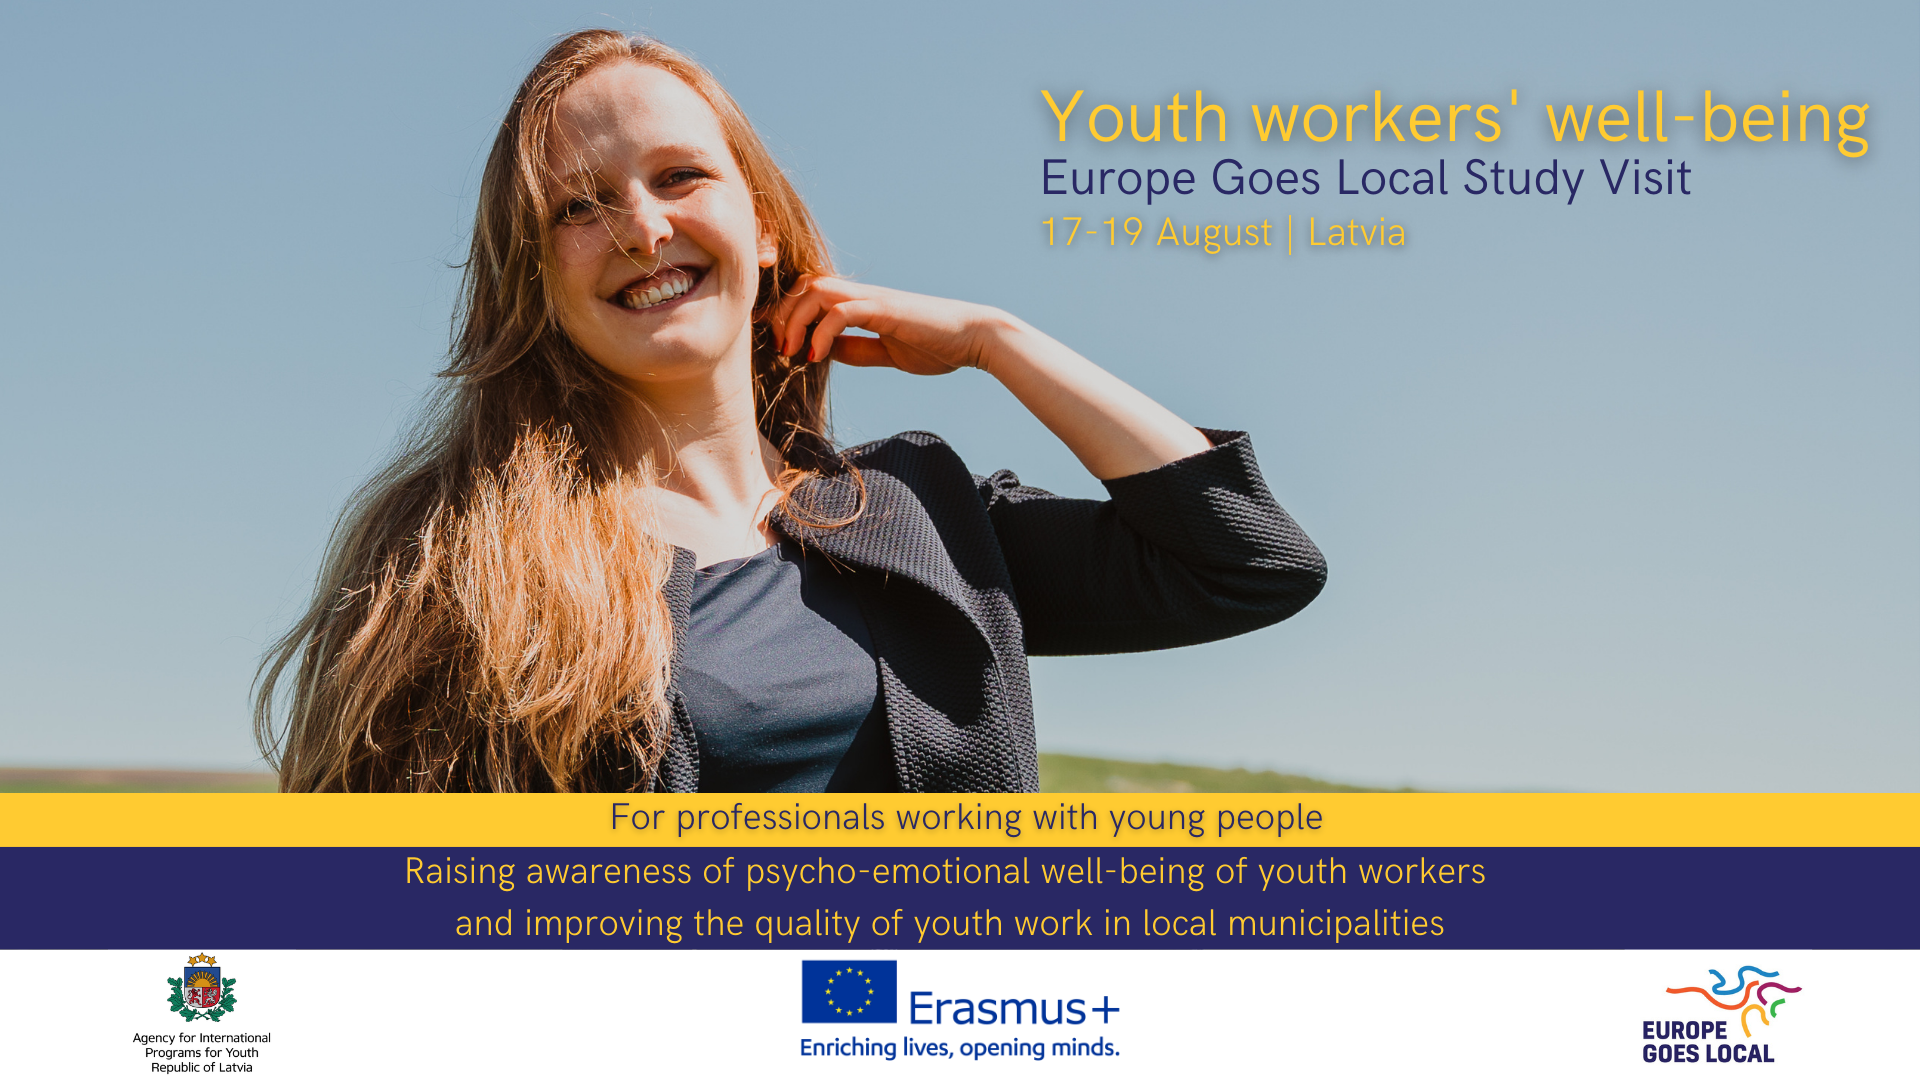 Call for participants: Let’s talk about the emotional and mental health of youth workers